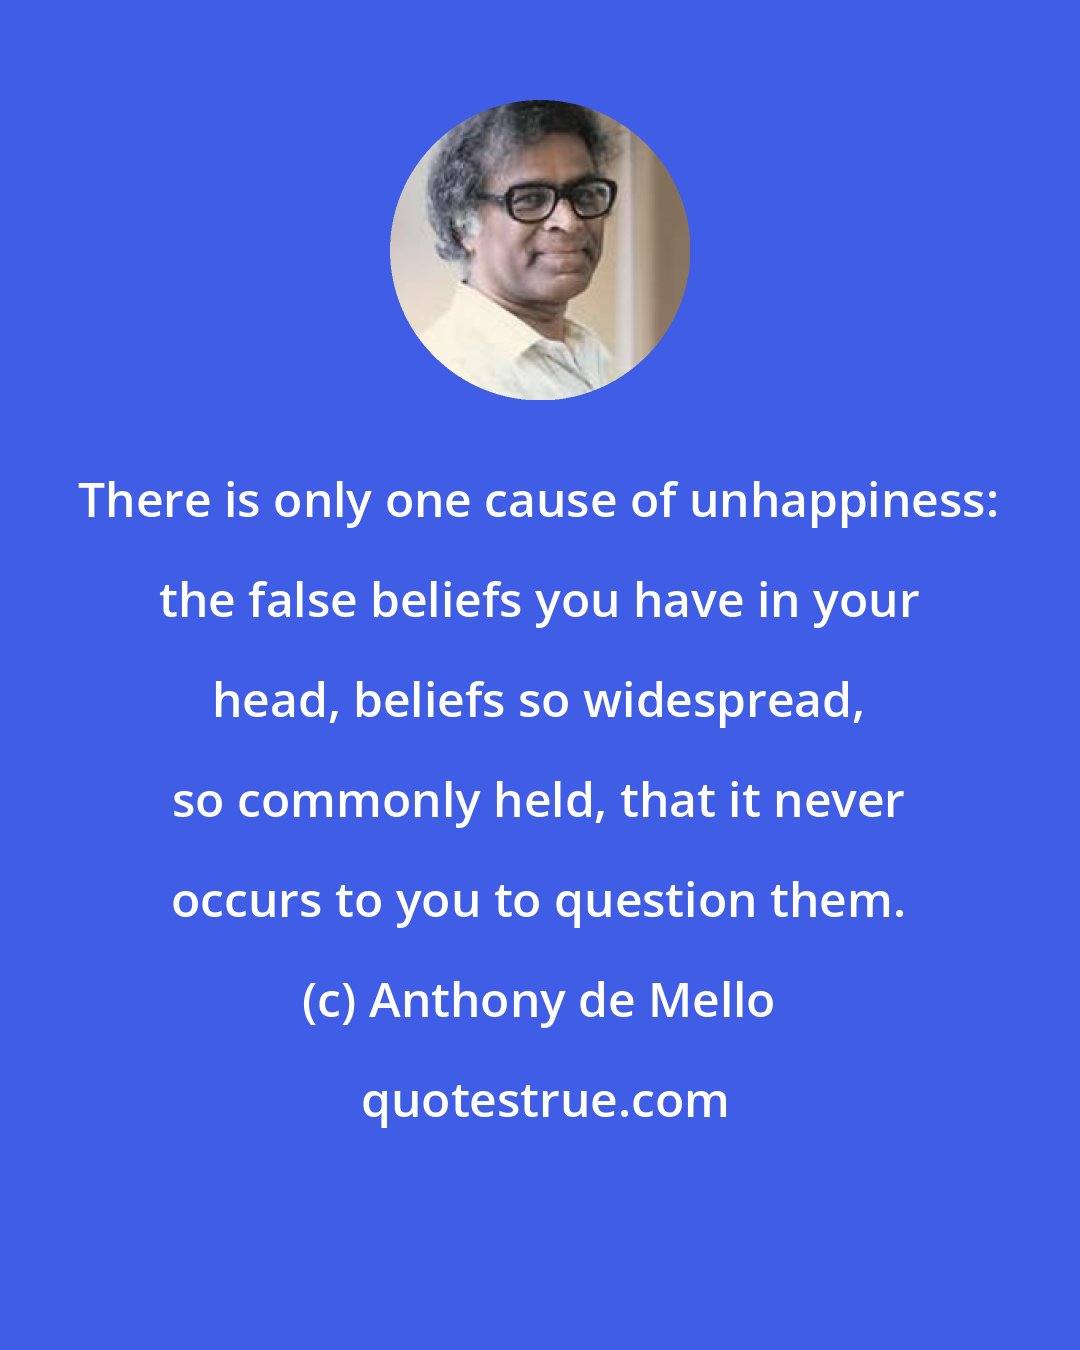 Anthony de Mello: There is only one cause of unhappiness: the false beliefs you have in your head, beliefs so widespread, so commonly held, that it never occurs to you to question them.